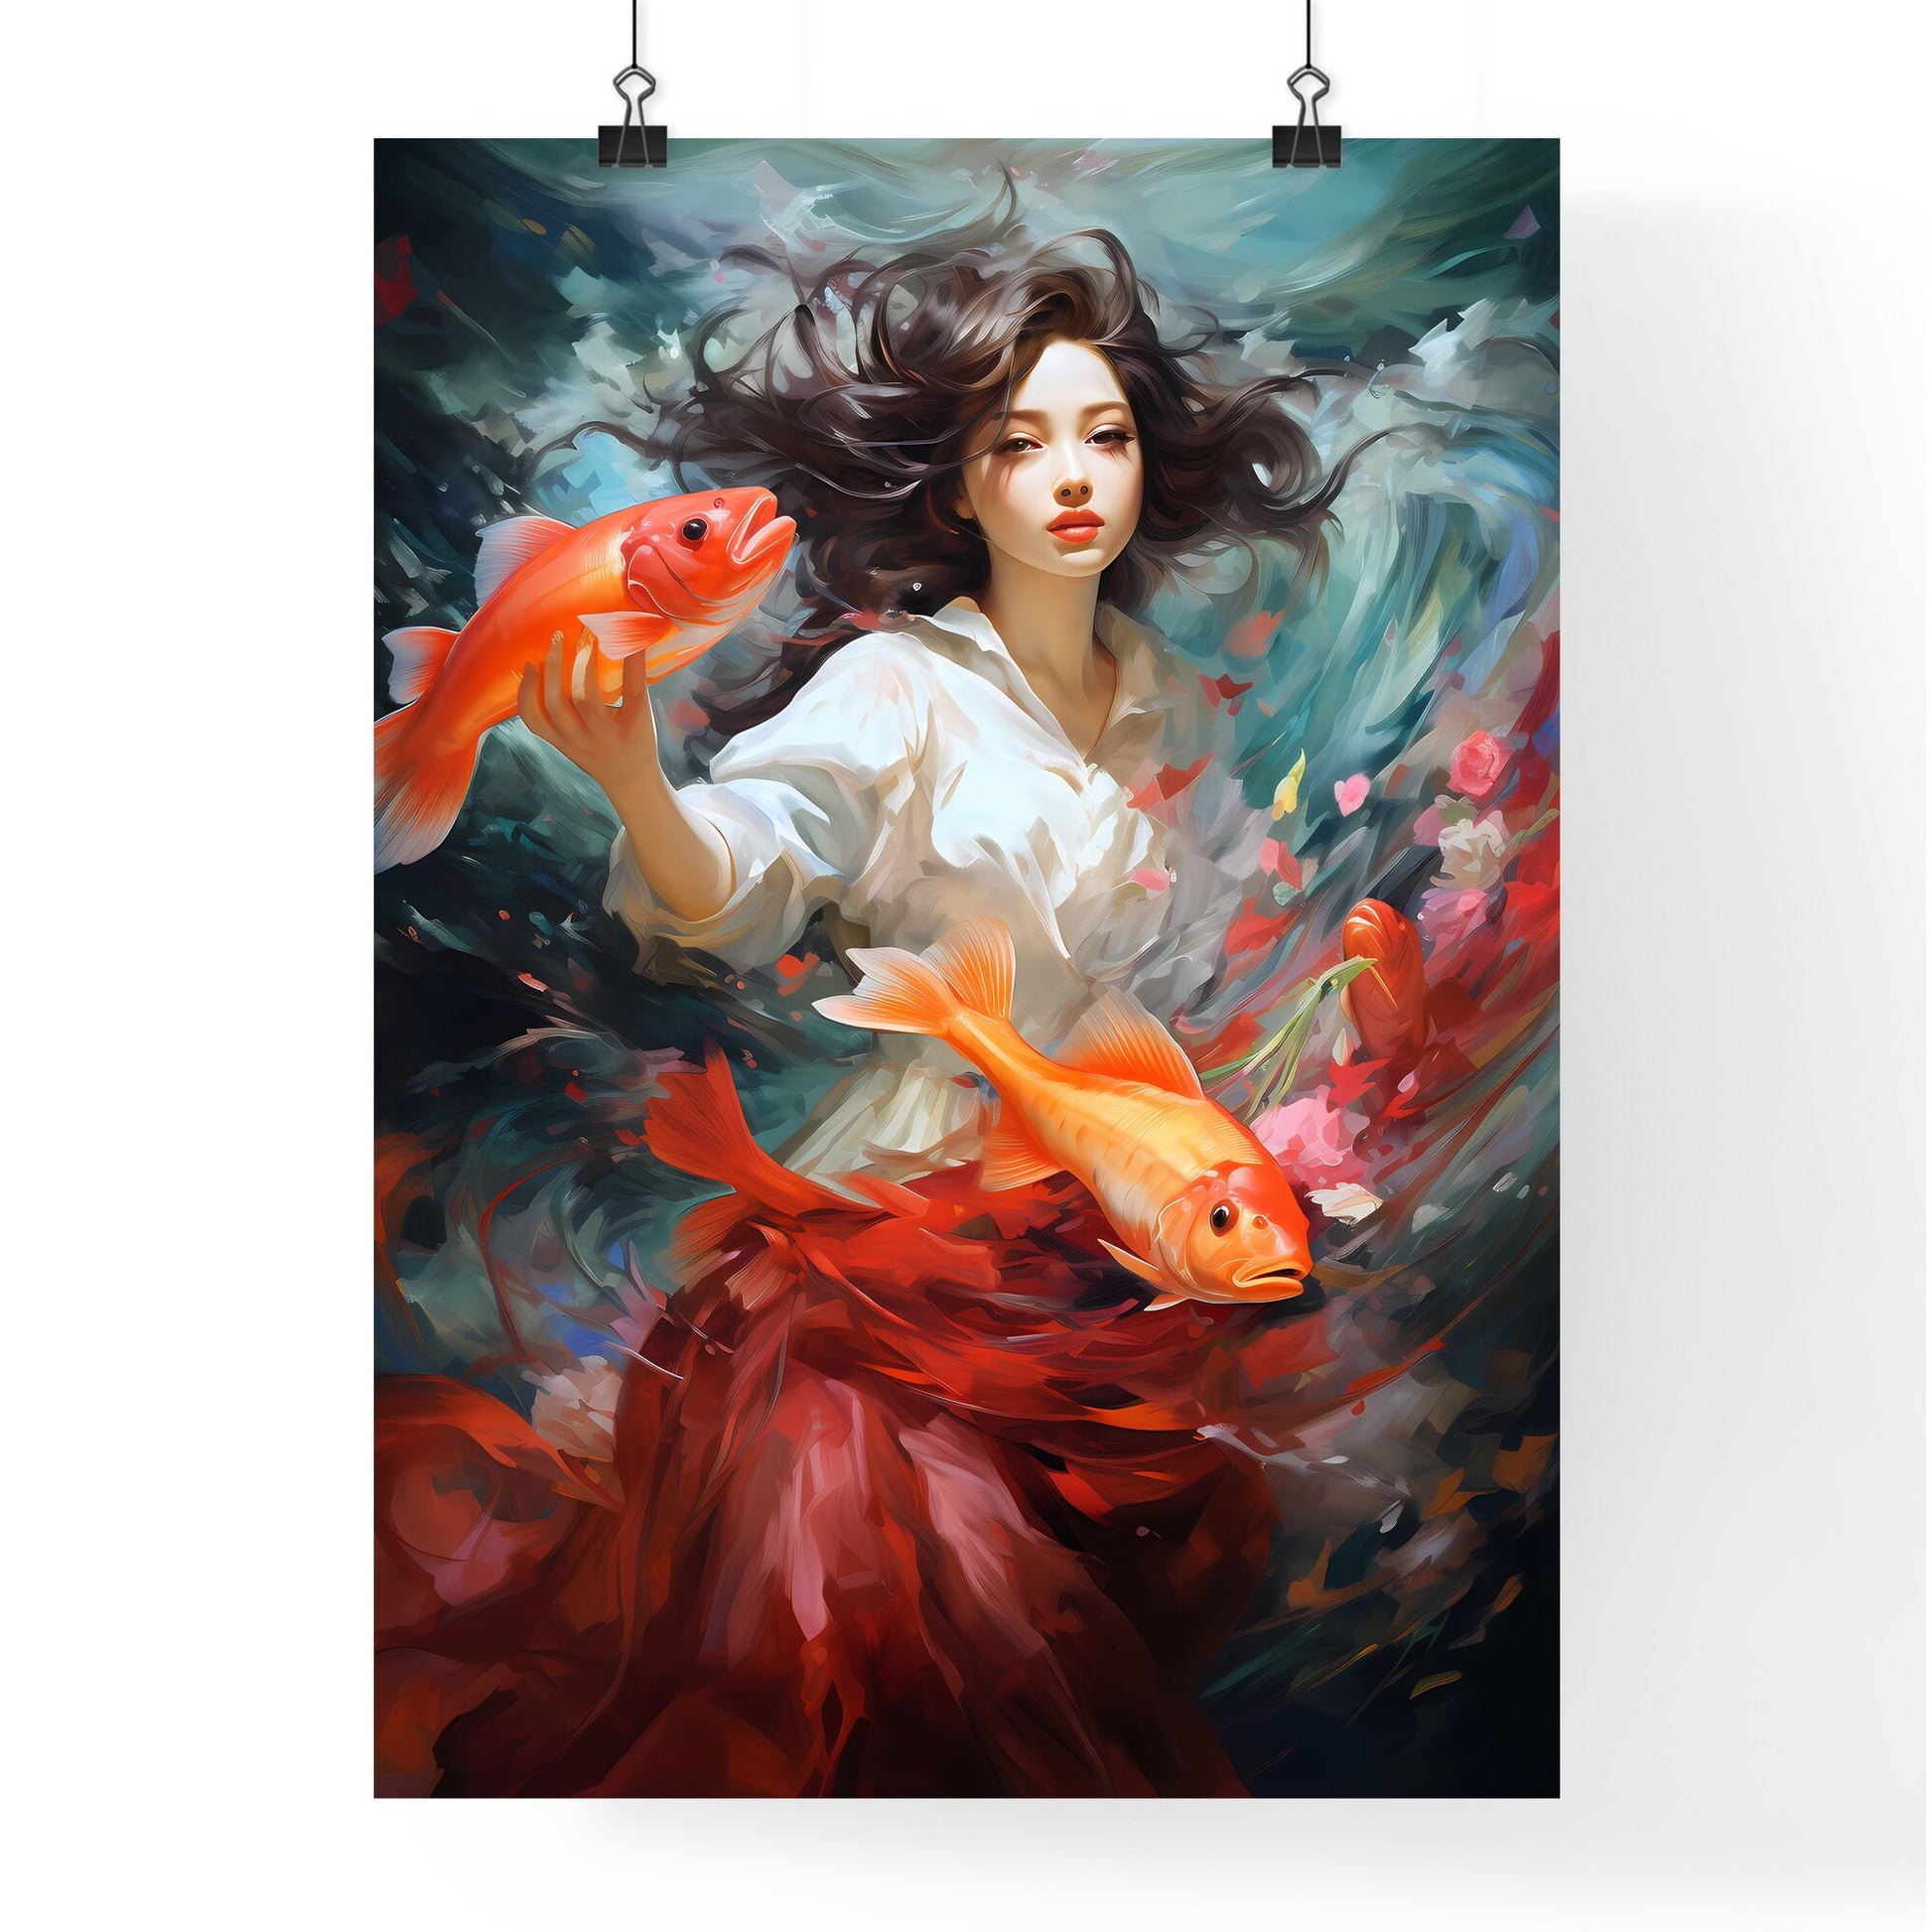 She Is Catching The Fish - A Woman Holding Two Fish Default Title